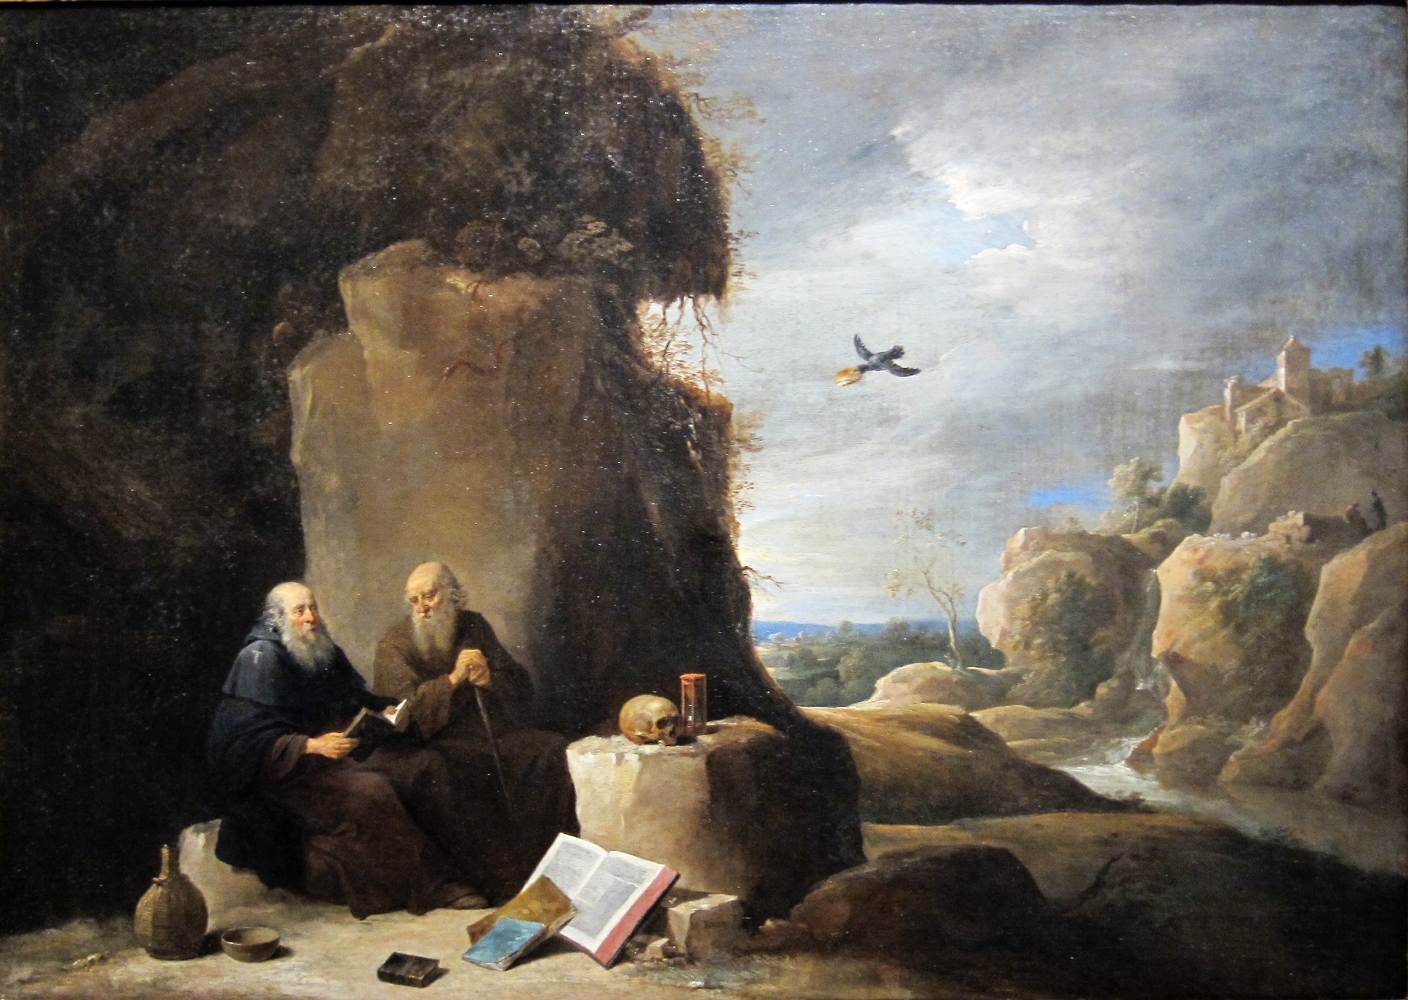 St Anthony Abbot Meets St. Paul the First Hermit